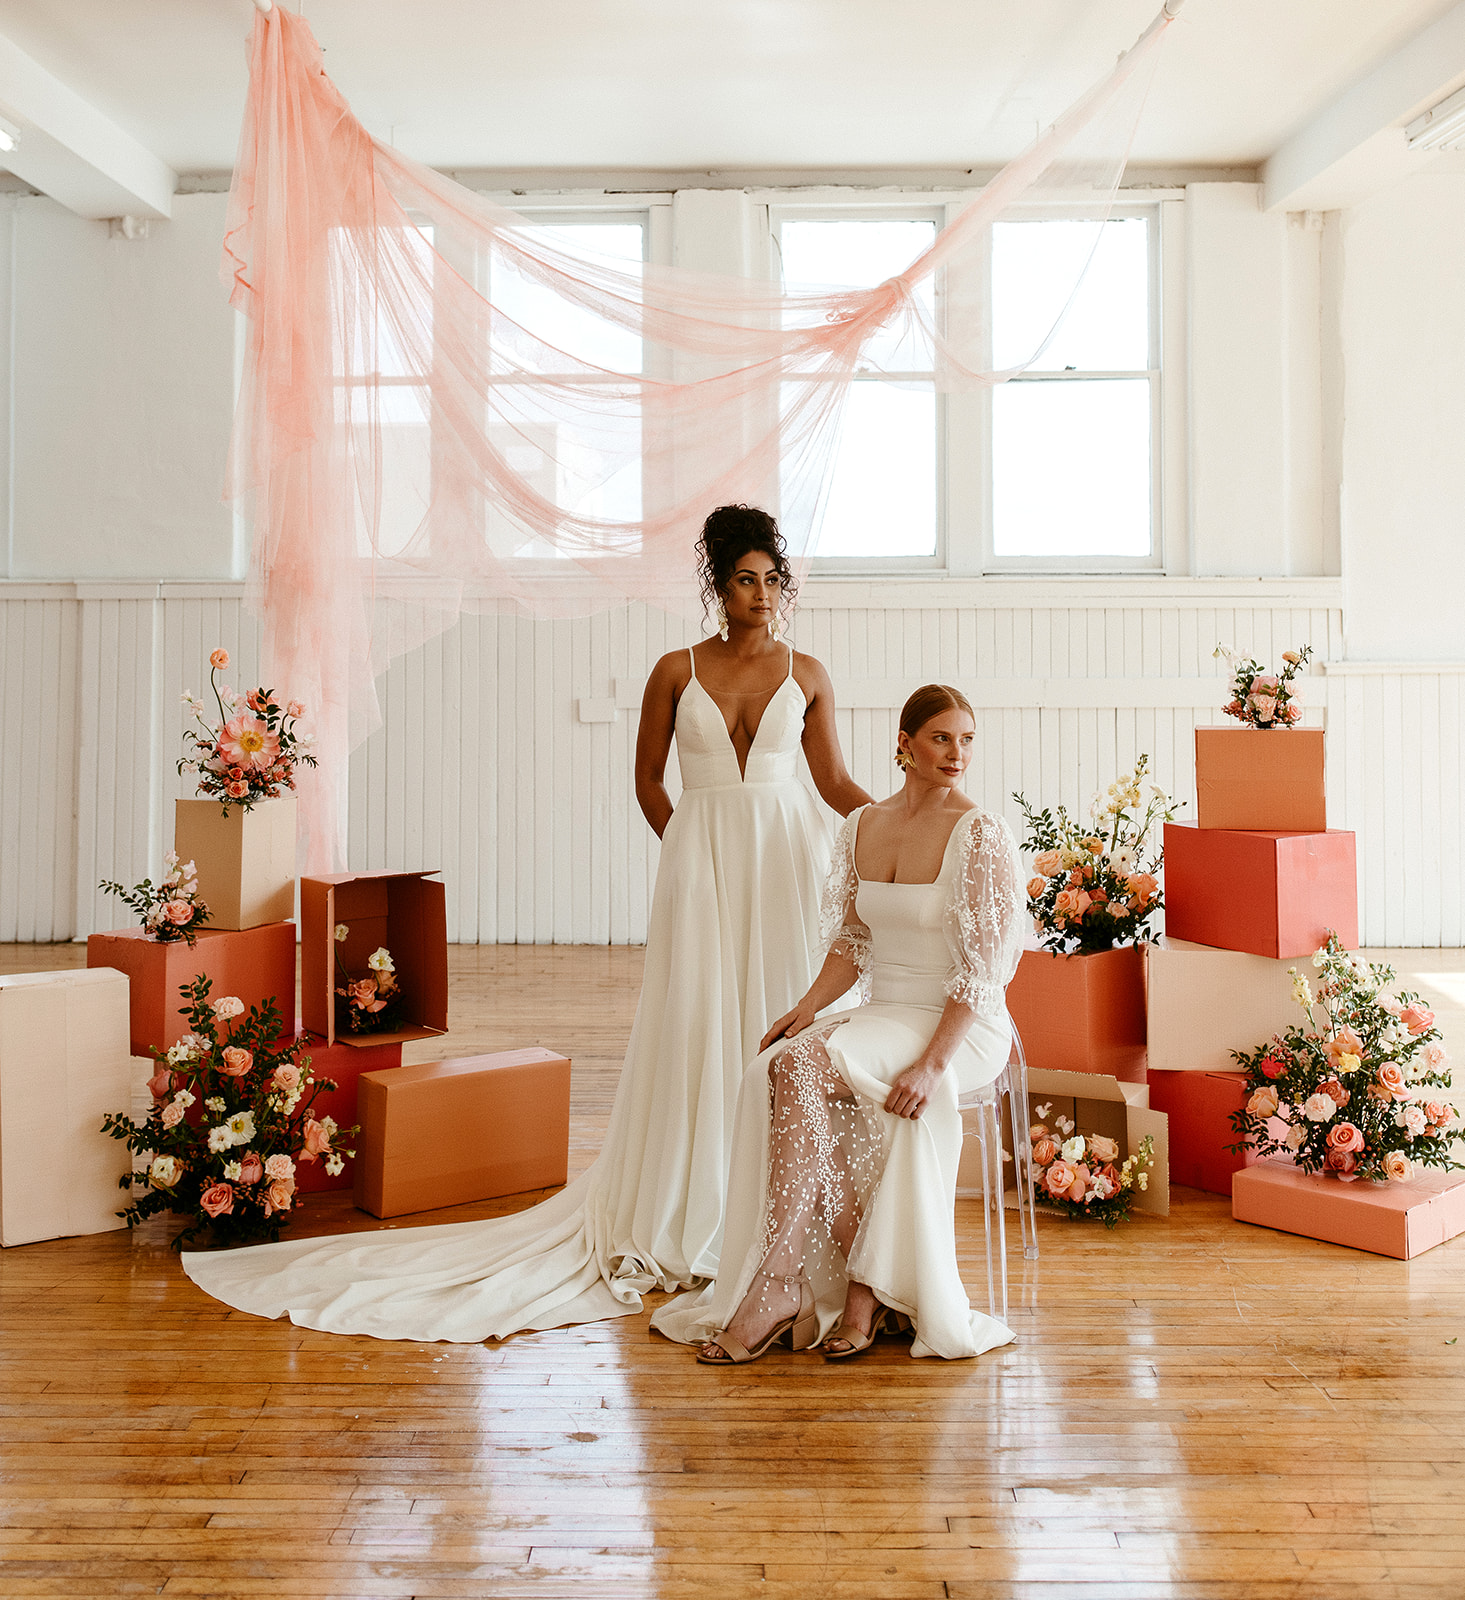 Boho Bridal Style with citrus details and pink hanging fabric in a downtown Edmonton loft